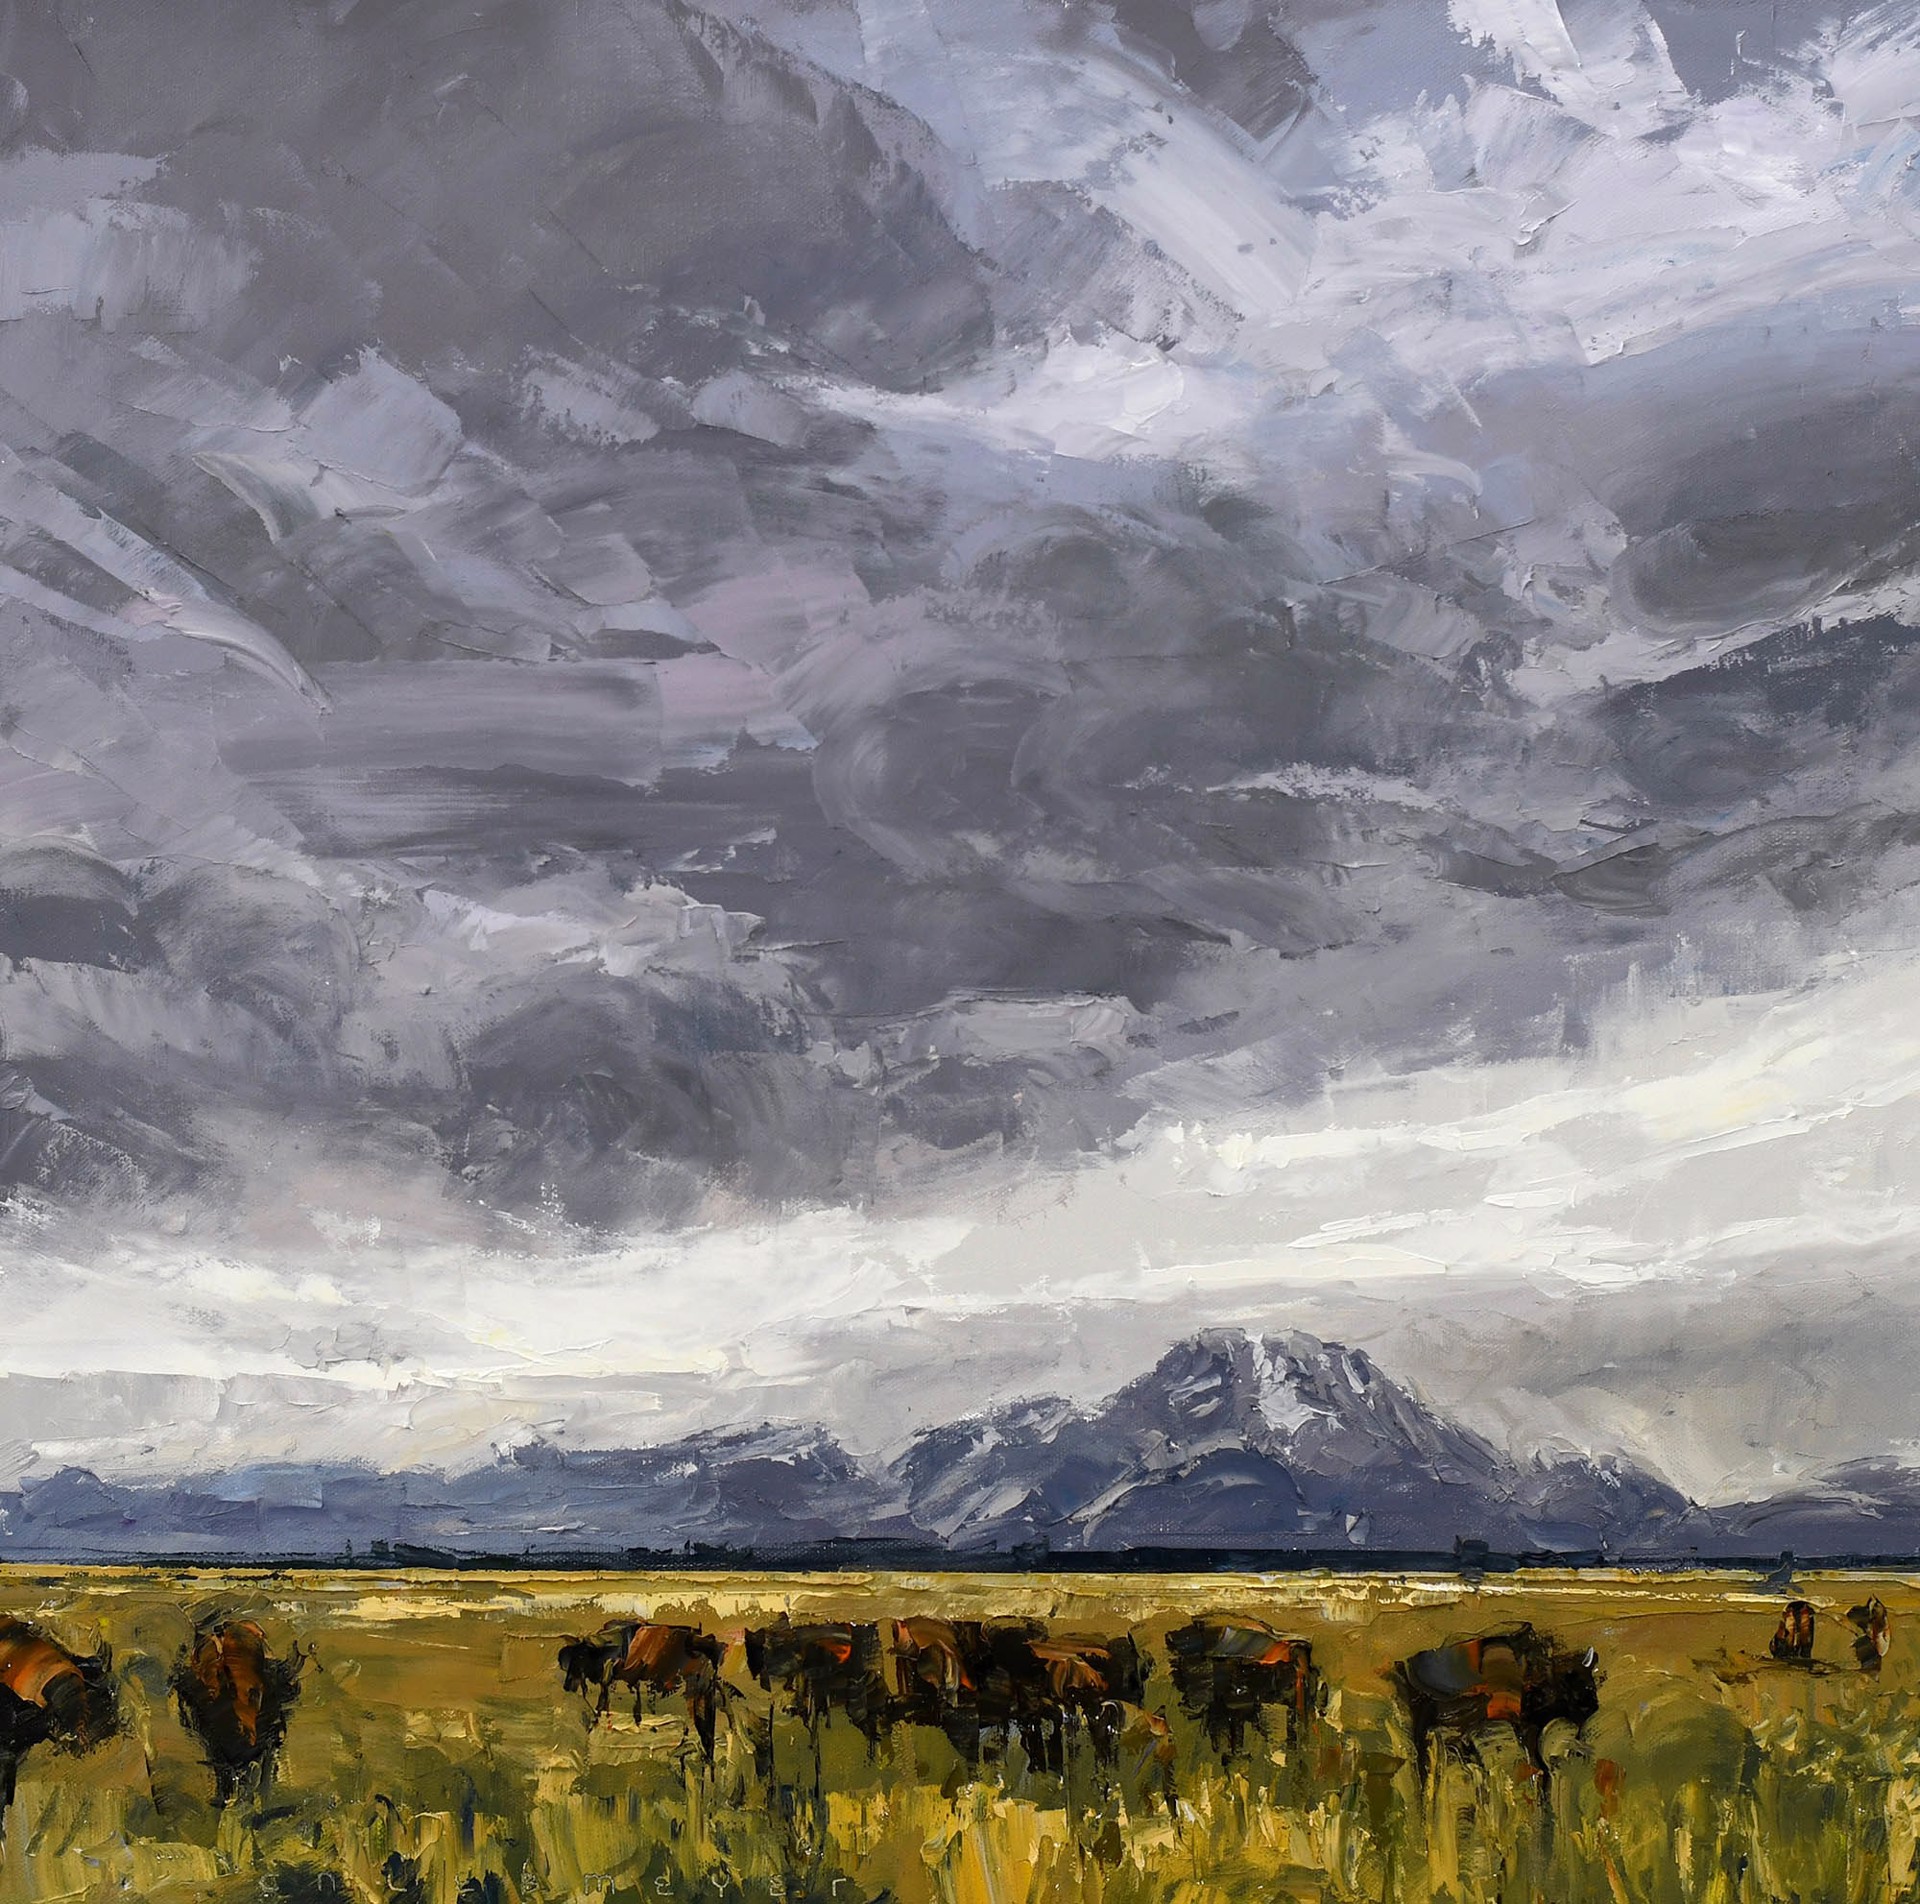 Original Oil Painting Featuring A Distant Mountain Landscape With Bison Grazing And Stormy Skies